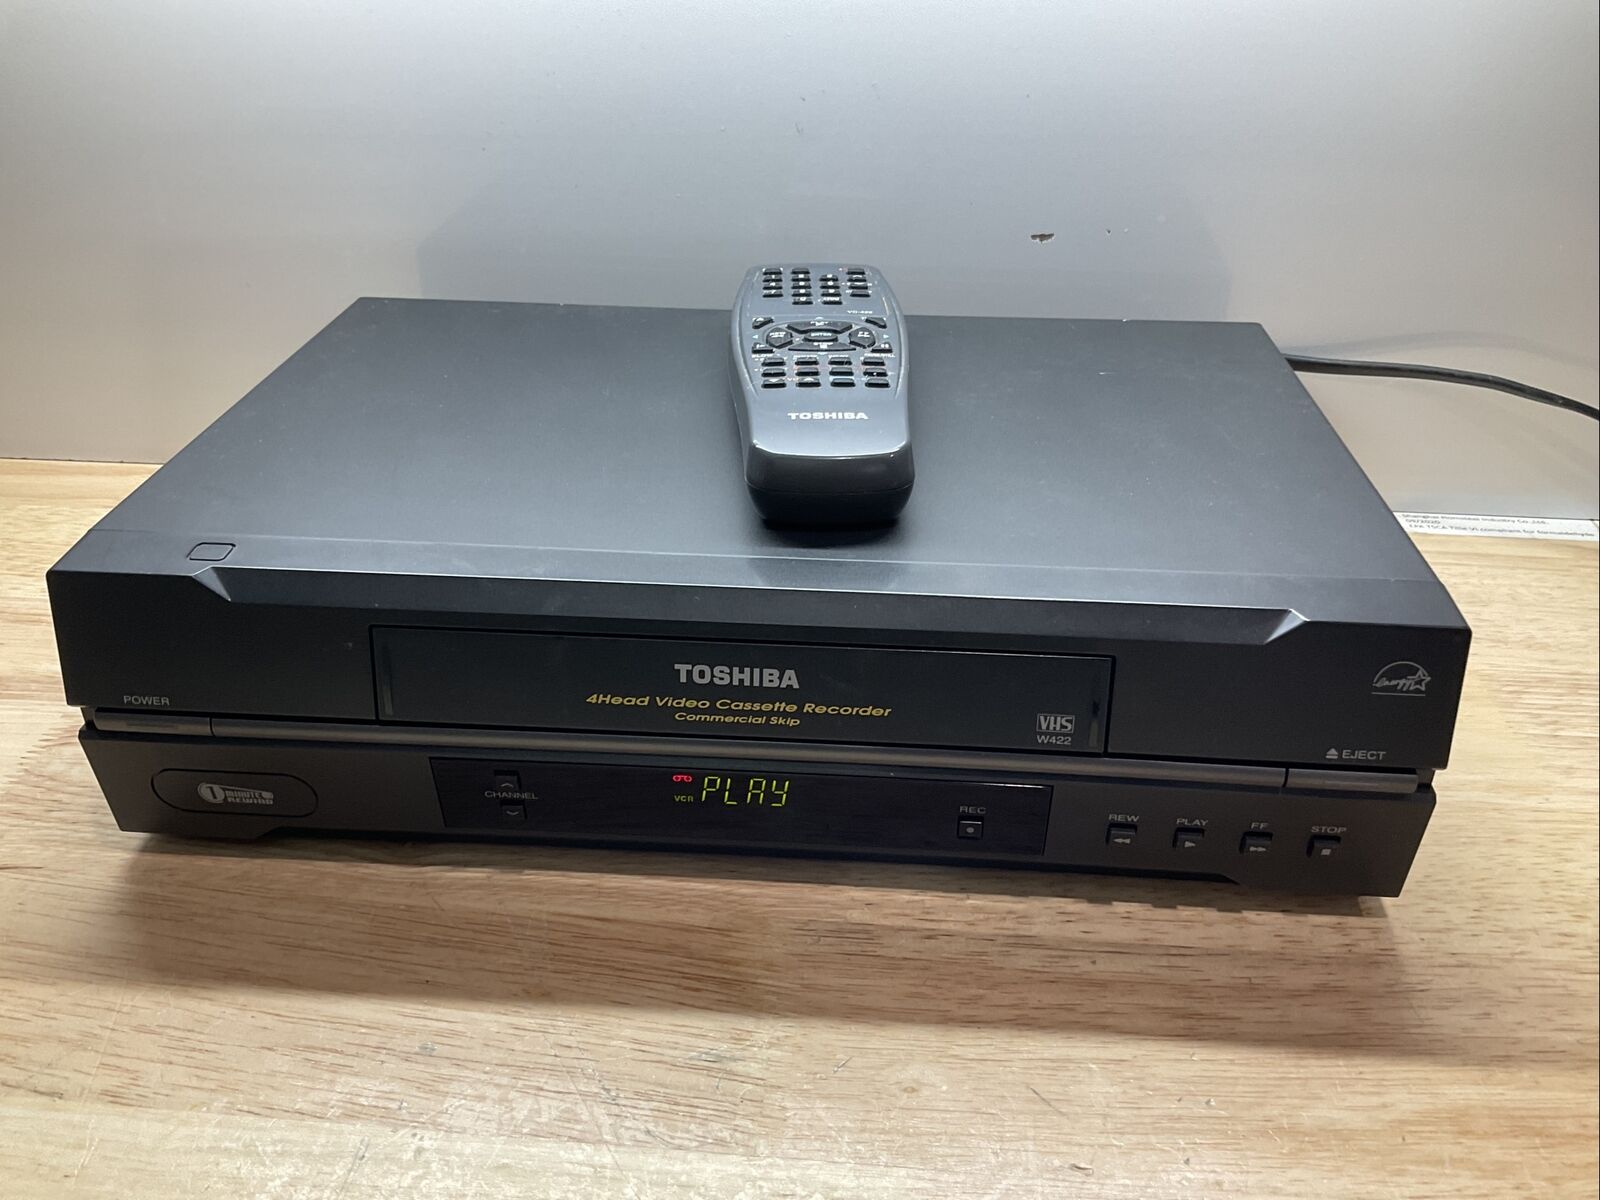 Toshiba Vcr W-422 4-head Video Cassette Recorder Vhs Player With Remote